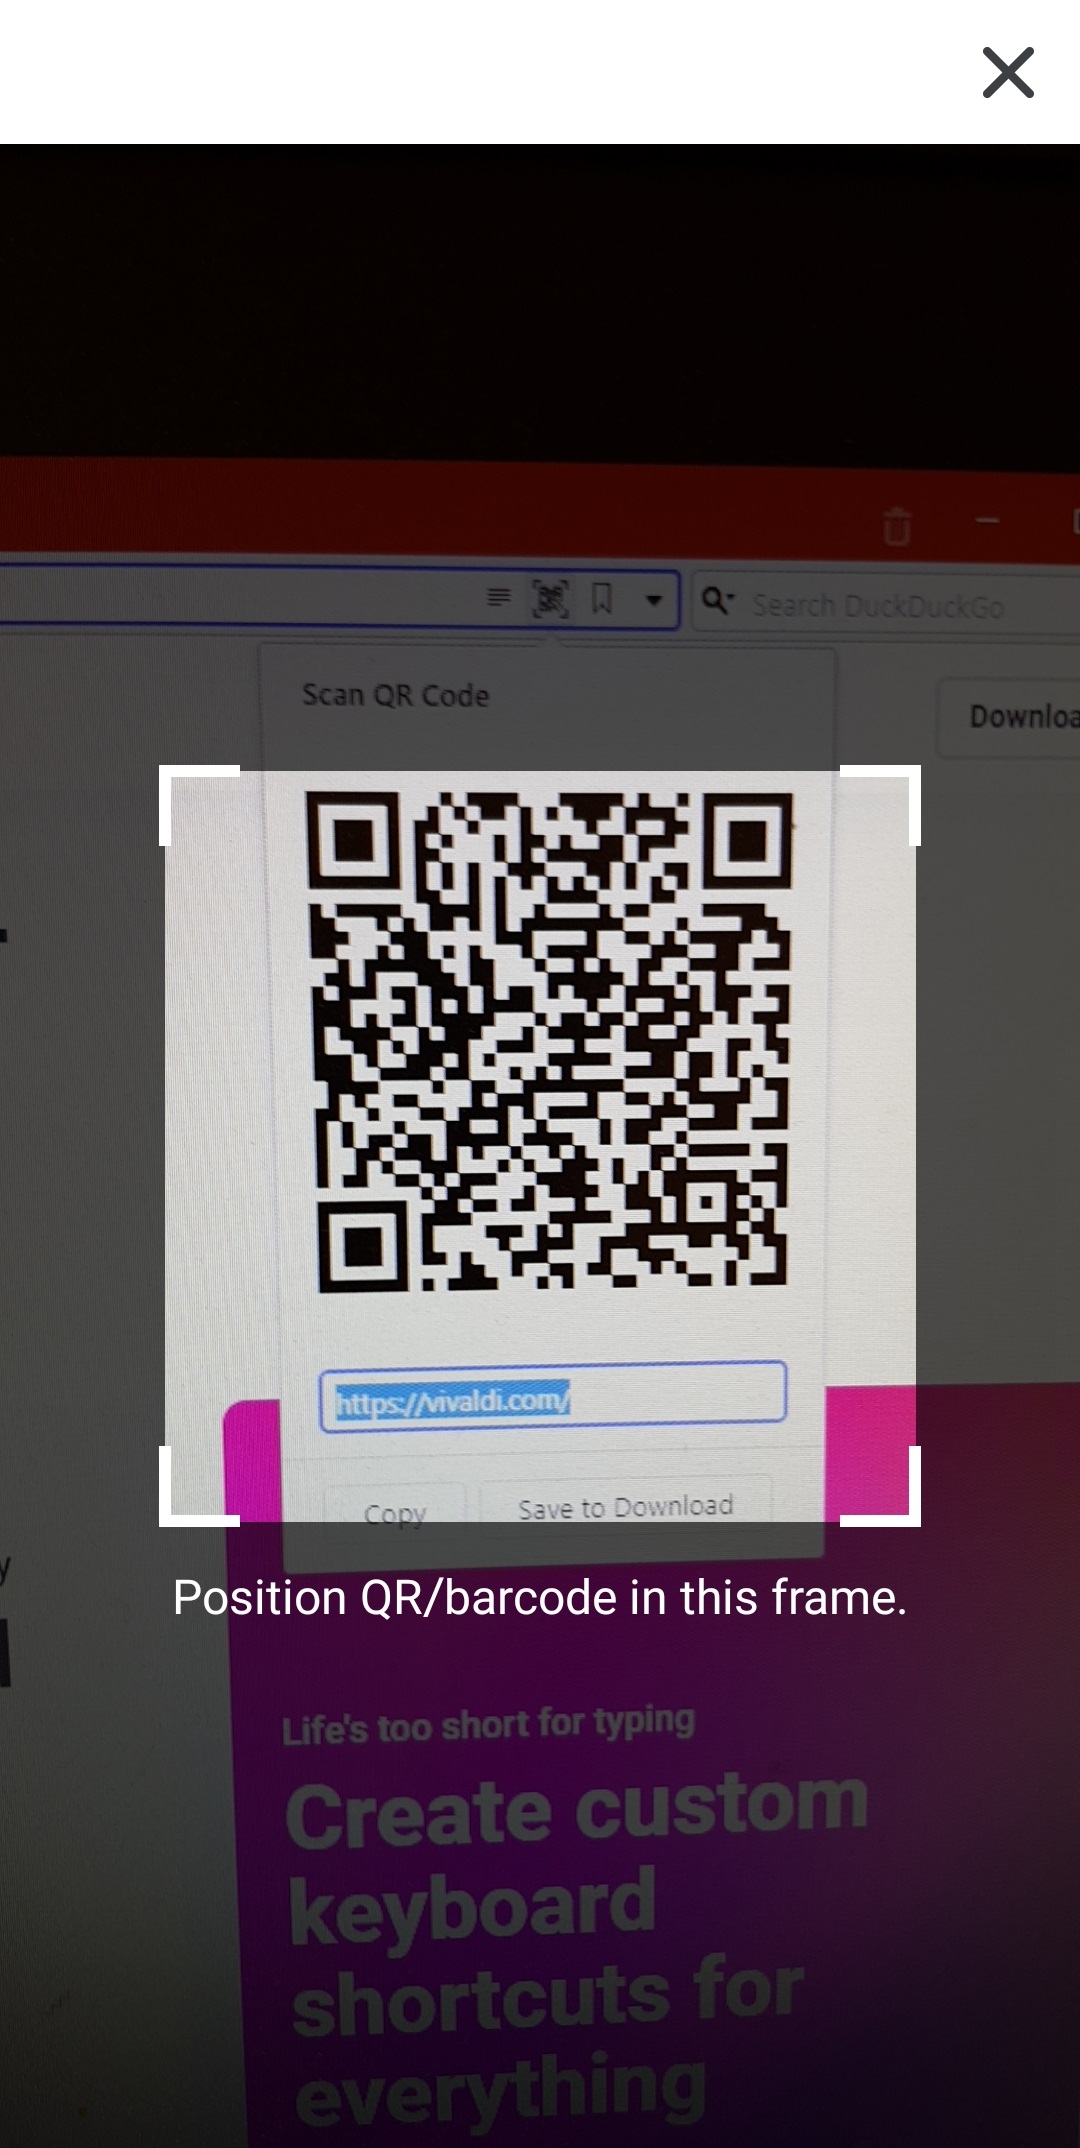 Scan Qr Codes With Vivaldi On Android Vivaldi Browser Help